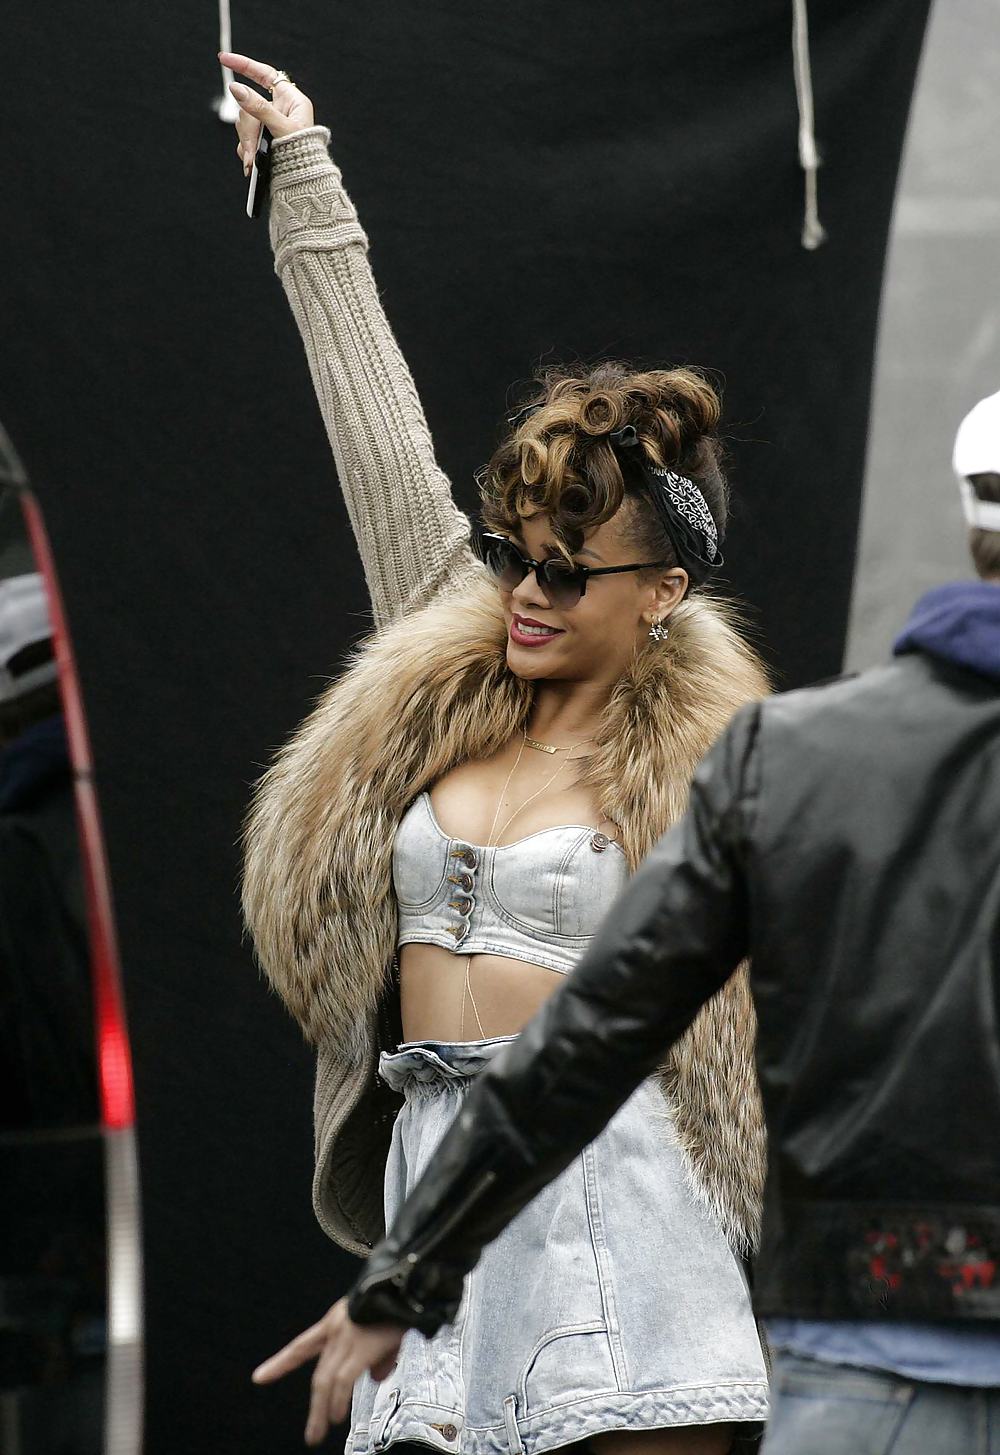 Rihanna filming the music video We Found Love in Ireland #8290555